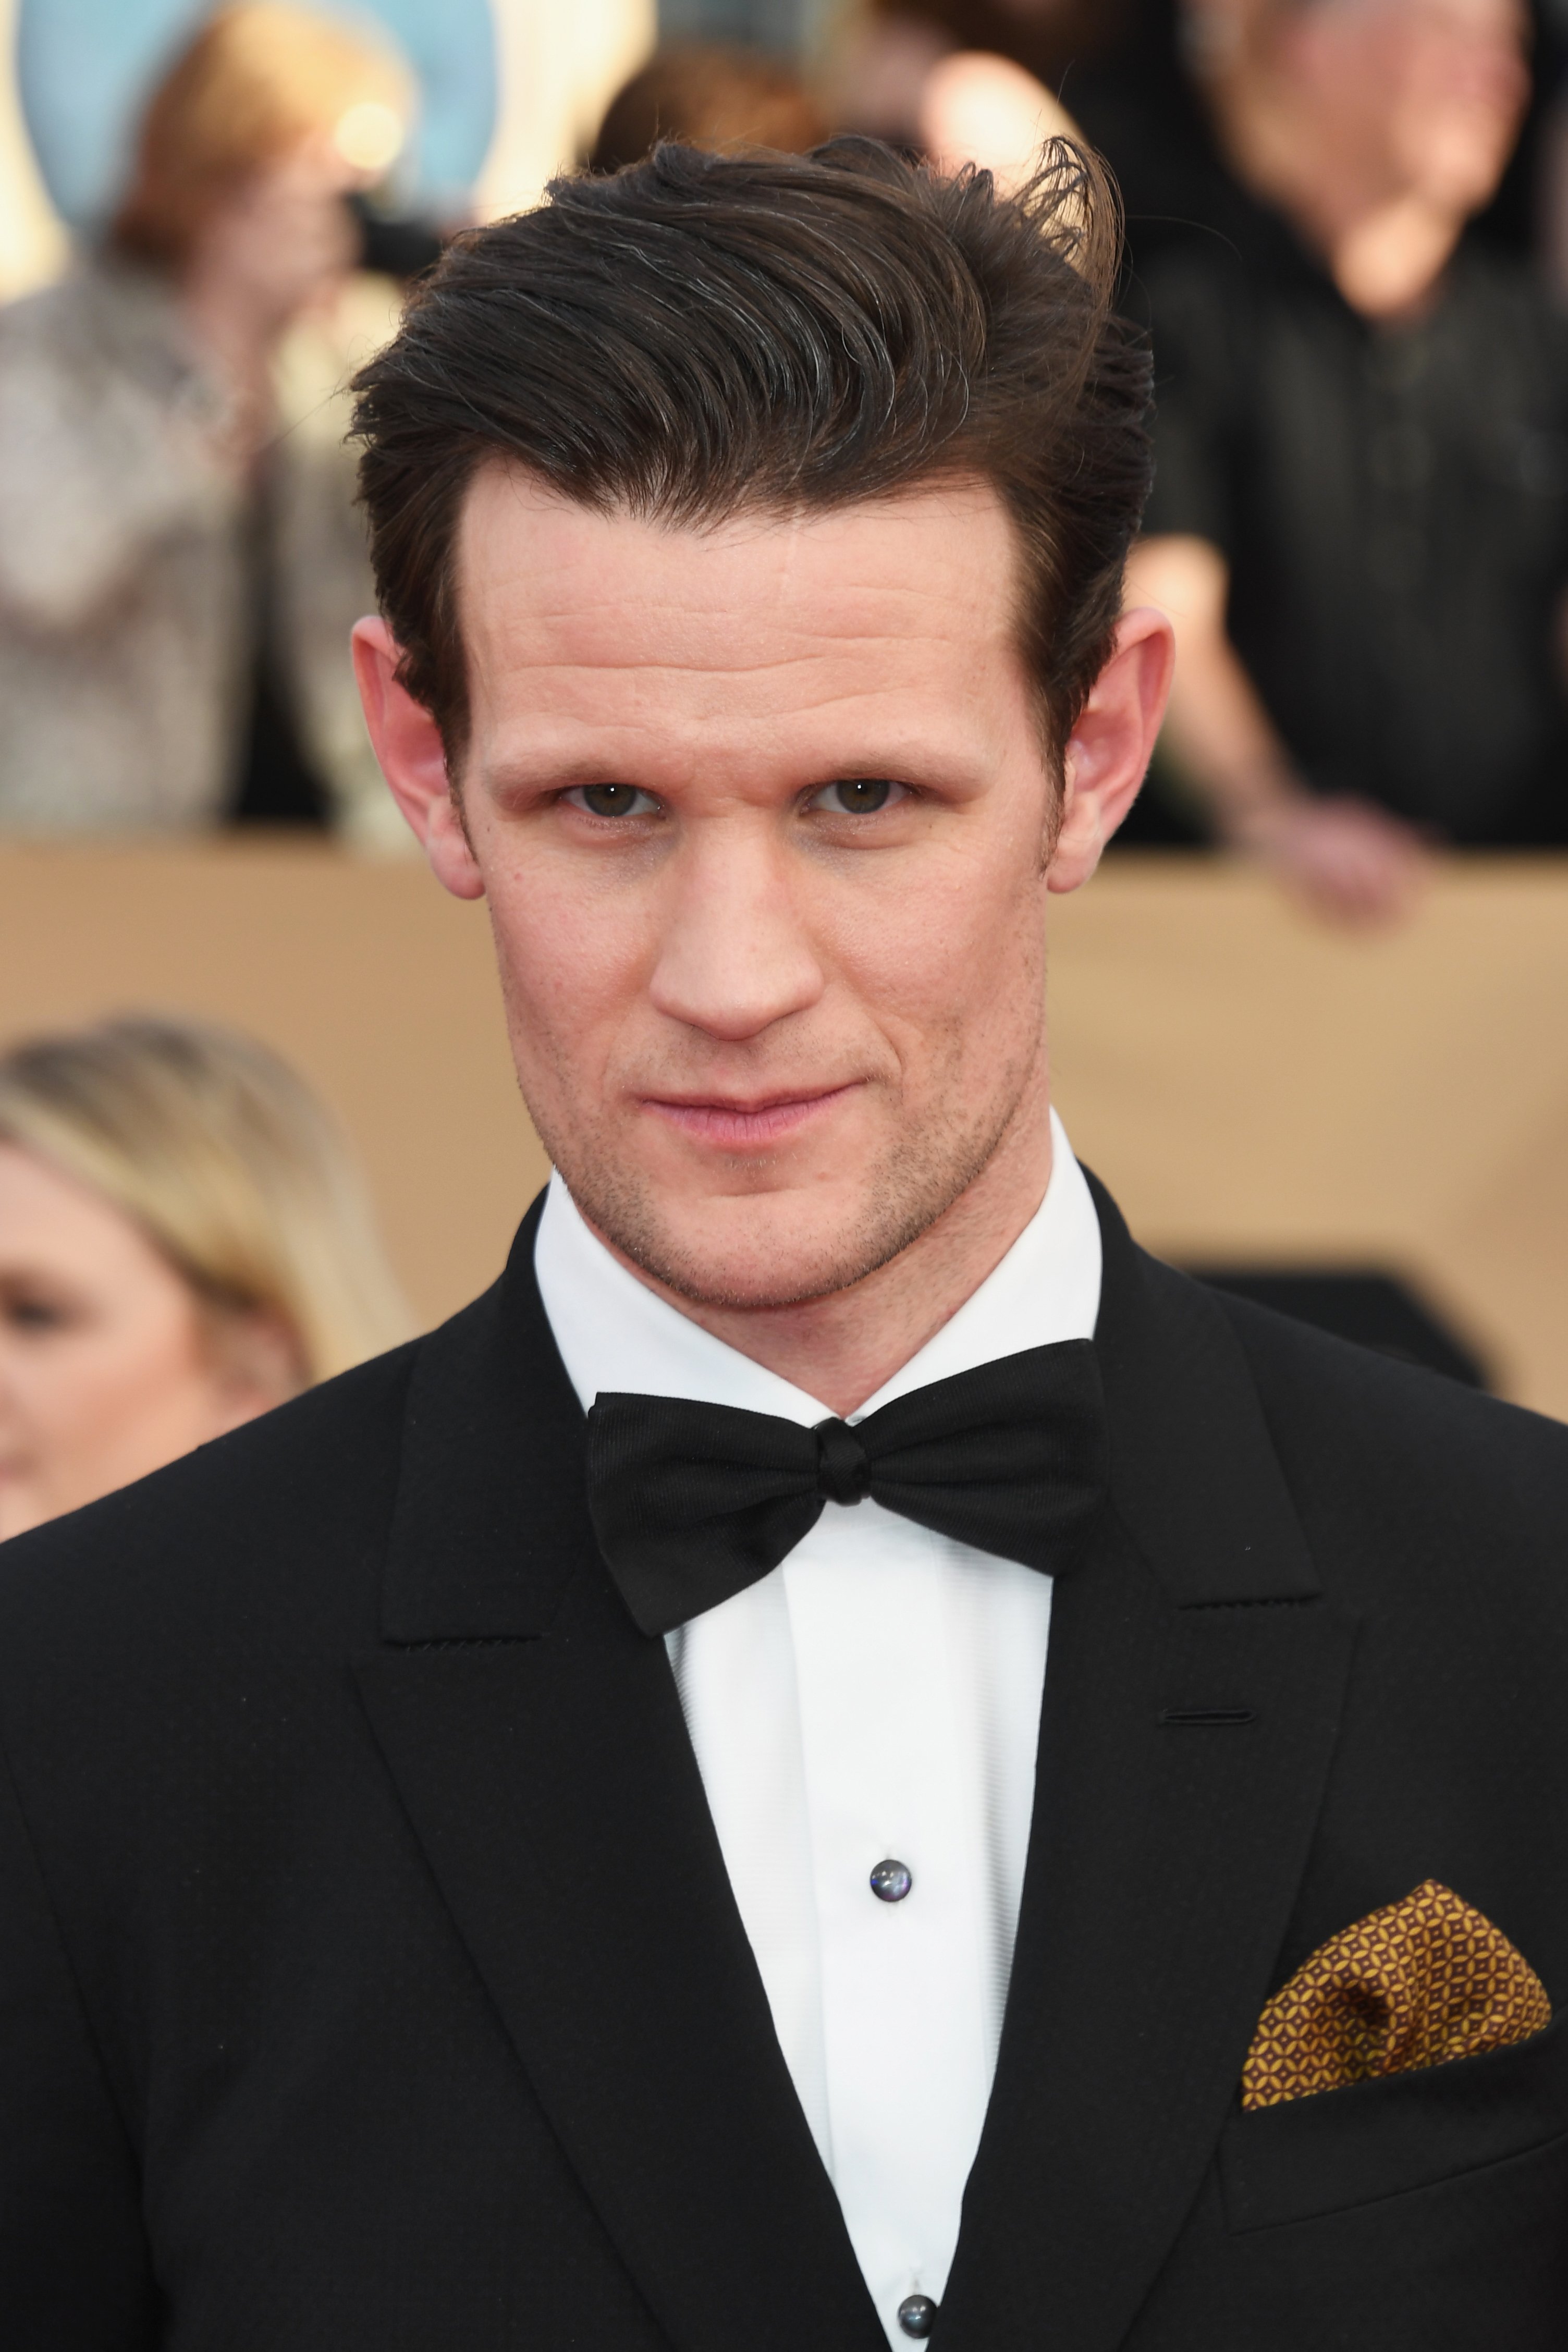 Actor Matt Smith attends the 23rd Annual Screen Actors Guild Awards at The Shrine Expo Hall on January 29, 2017 in Los Angeles, California. | Source: Getty Images